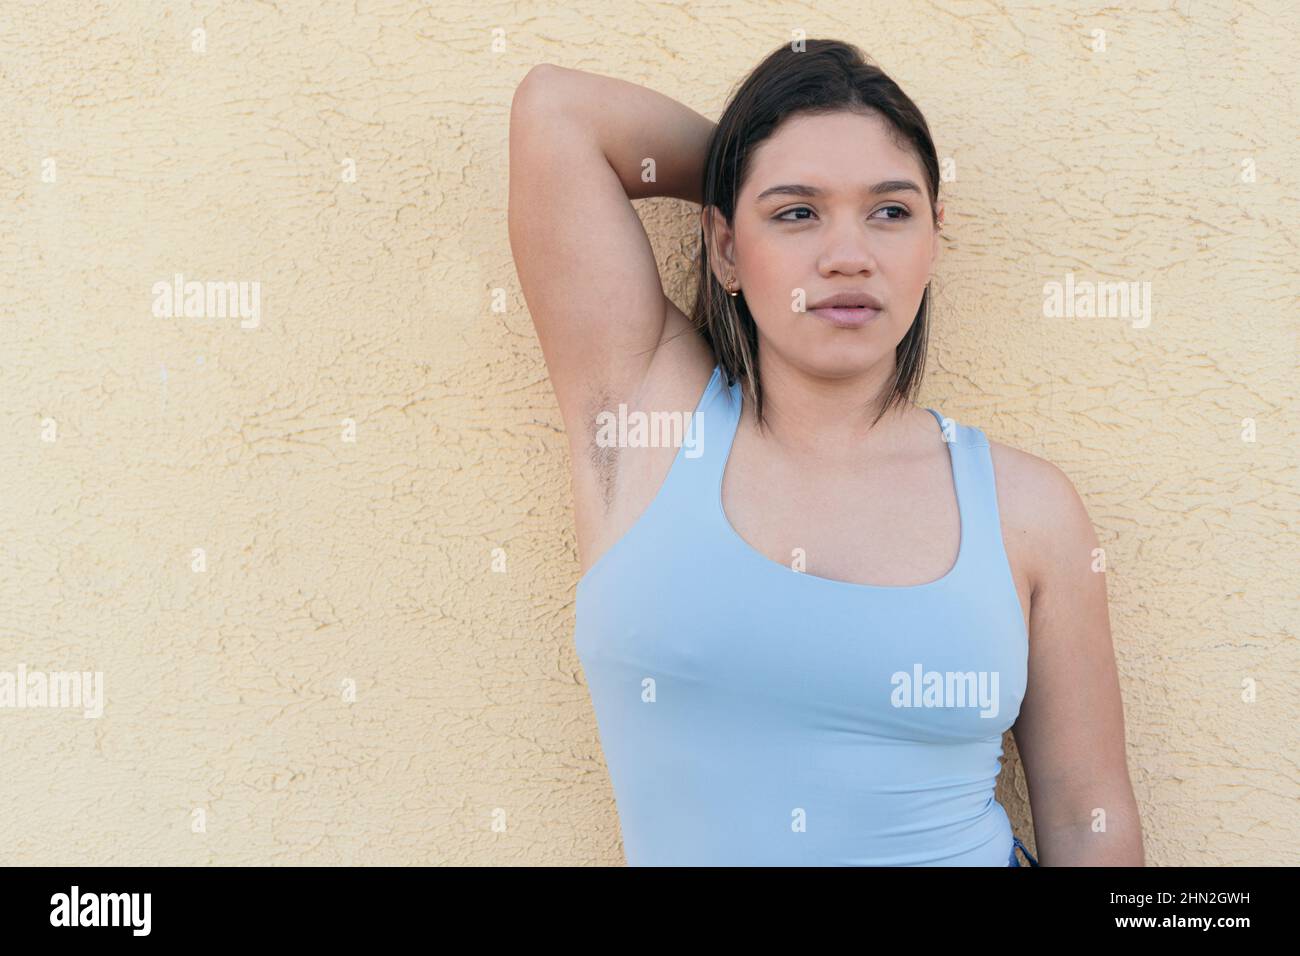 Natural woman with unshaven armpits looking to the side Stock Photo